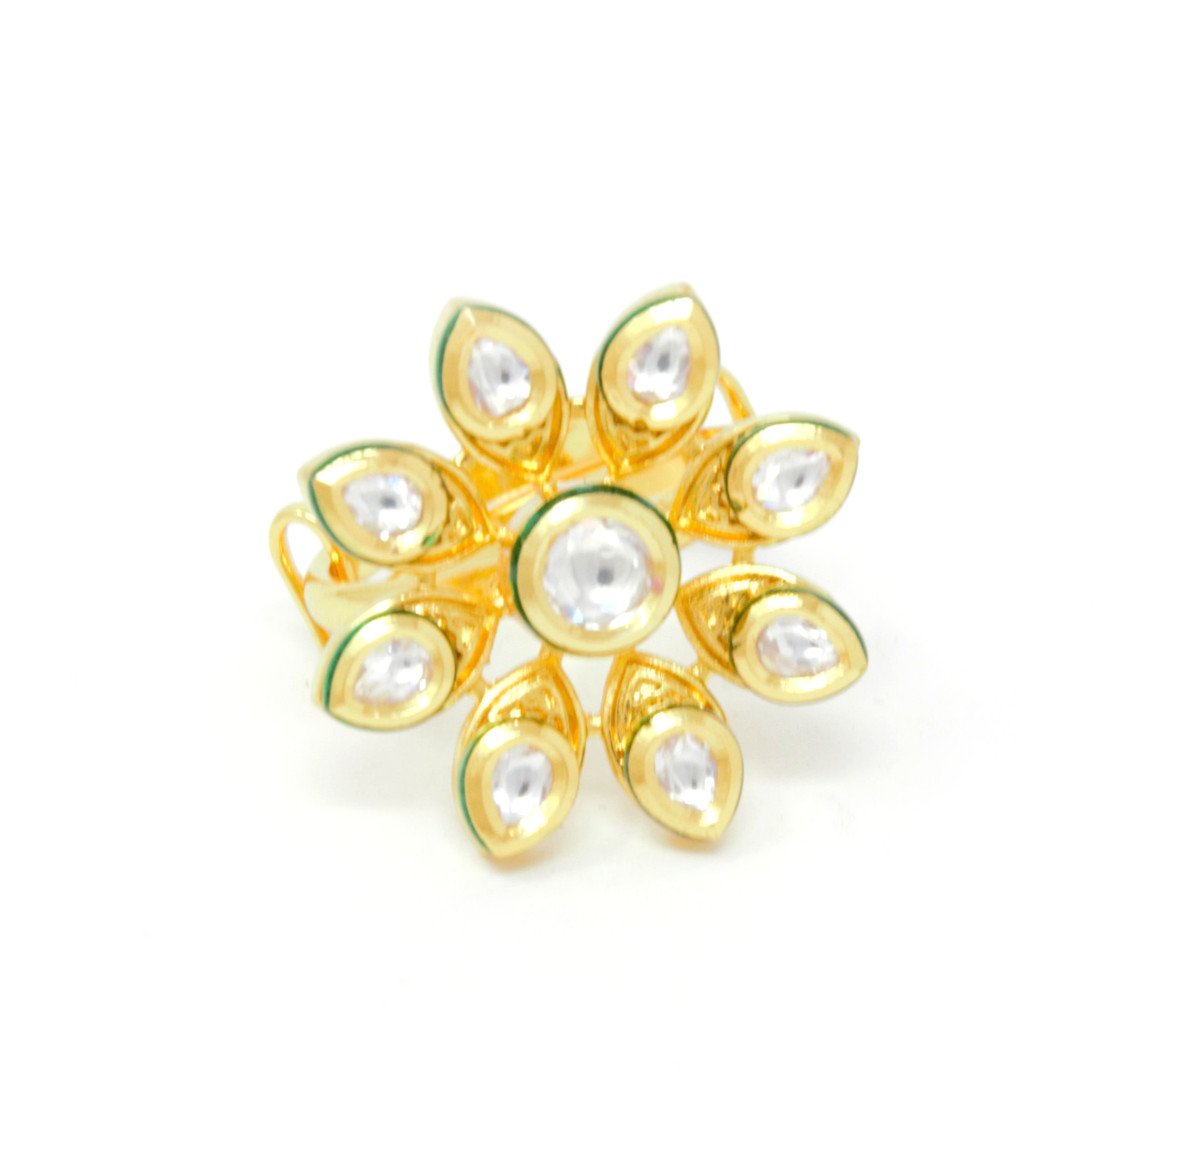 Gold Kundan Small Ring With Flower Kind Design